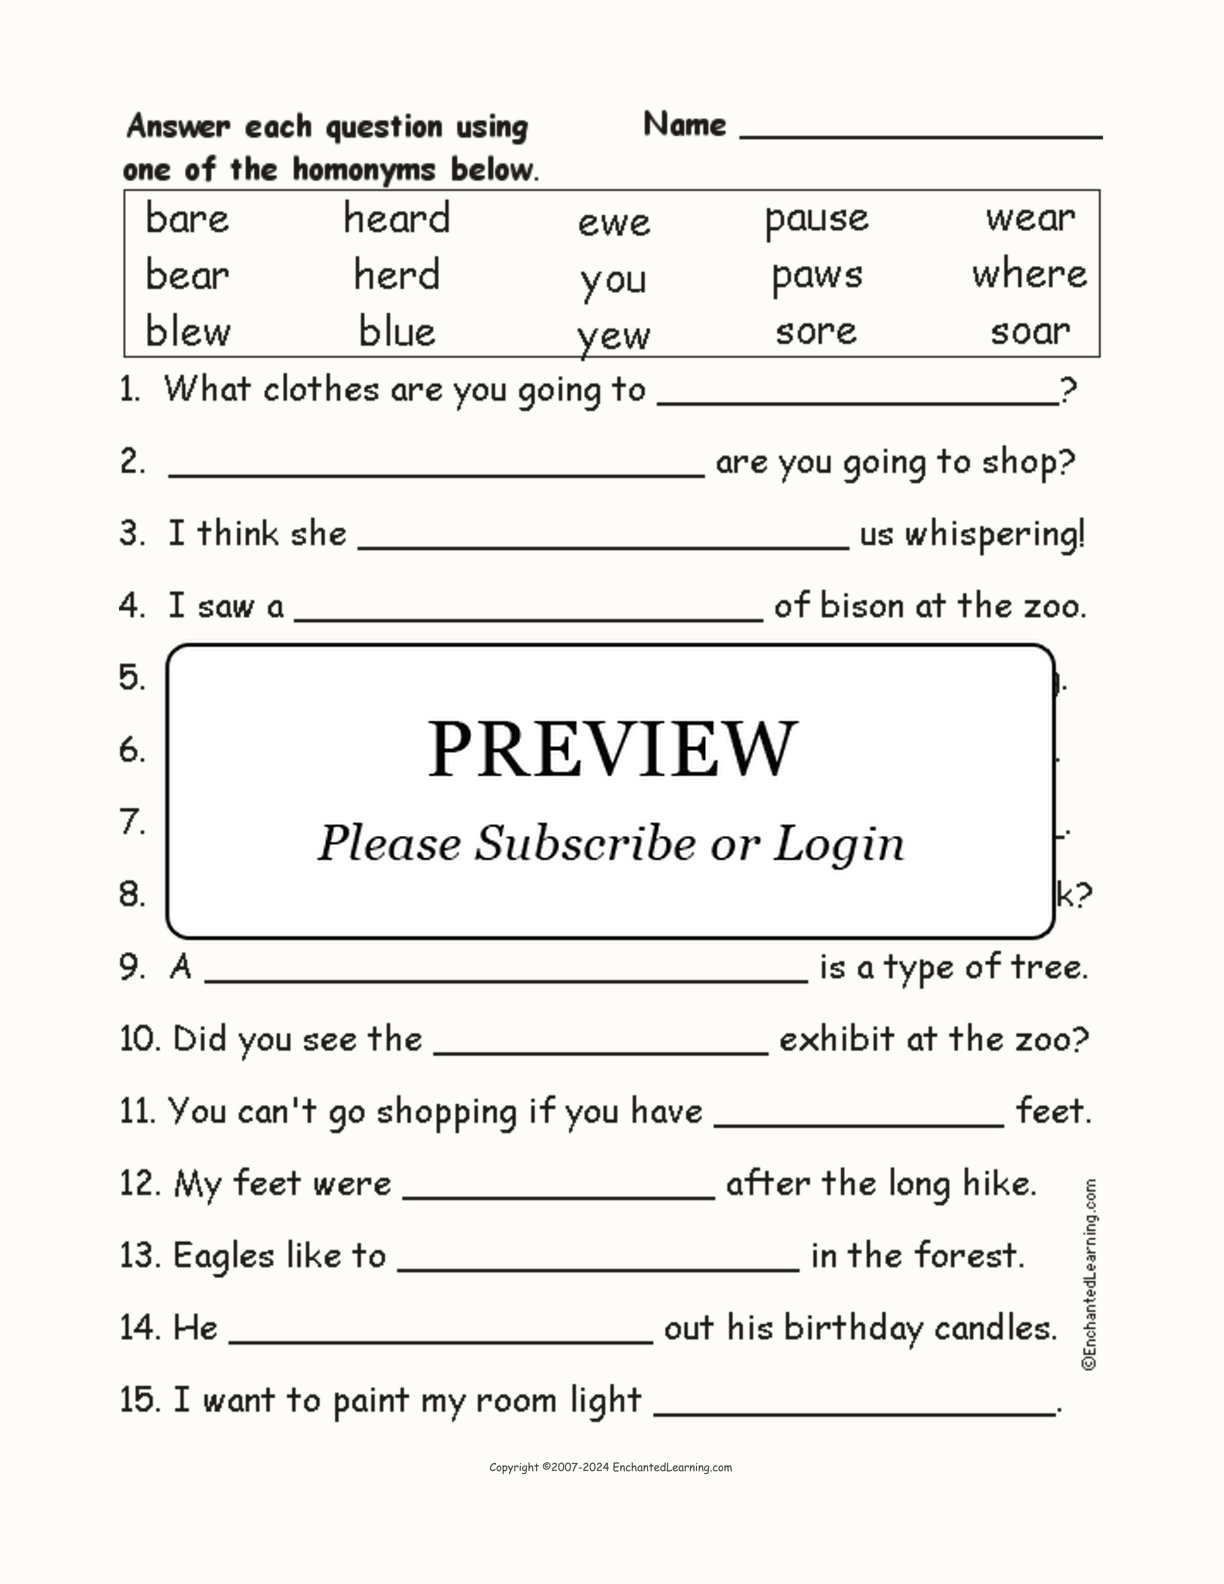 Homonyms Spelling Word Questions #10 interactive worksheet page 1